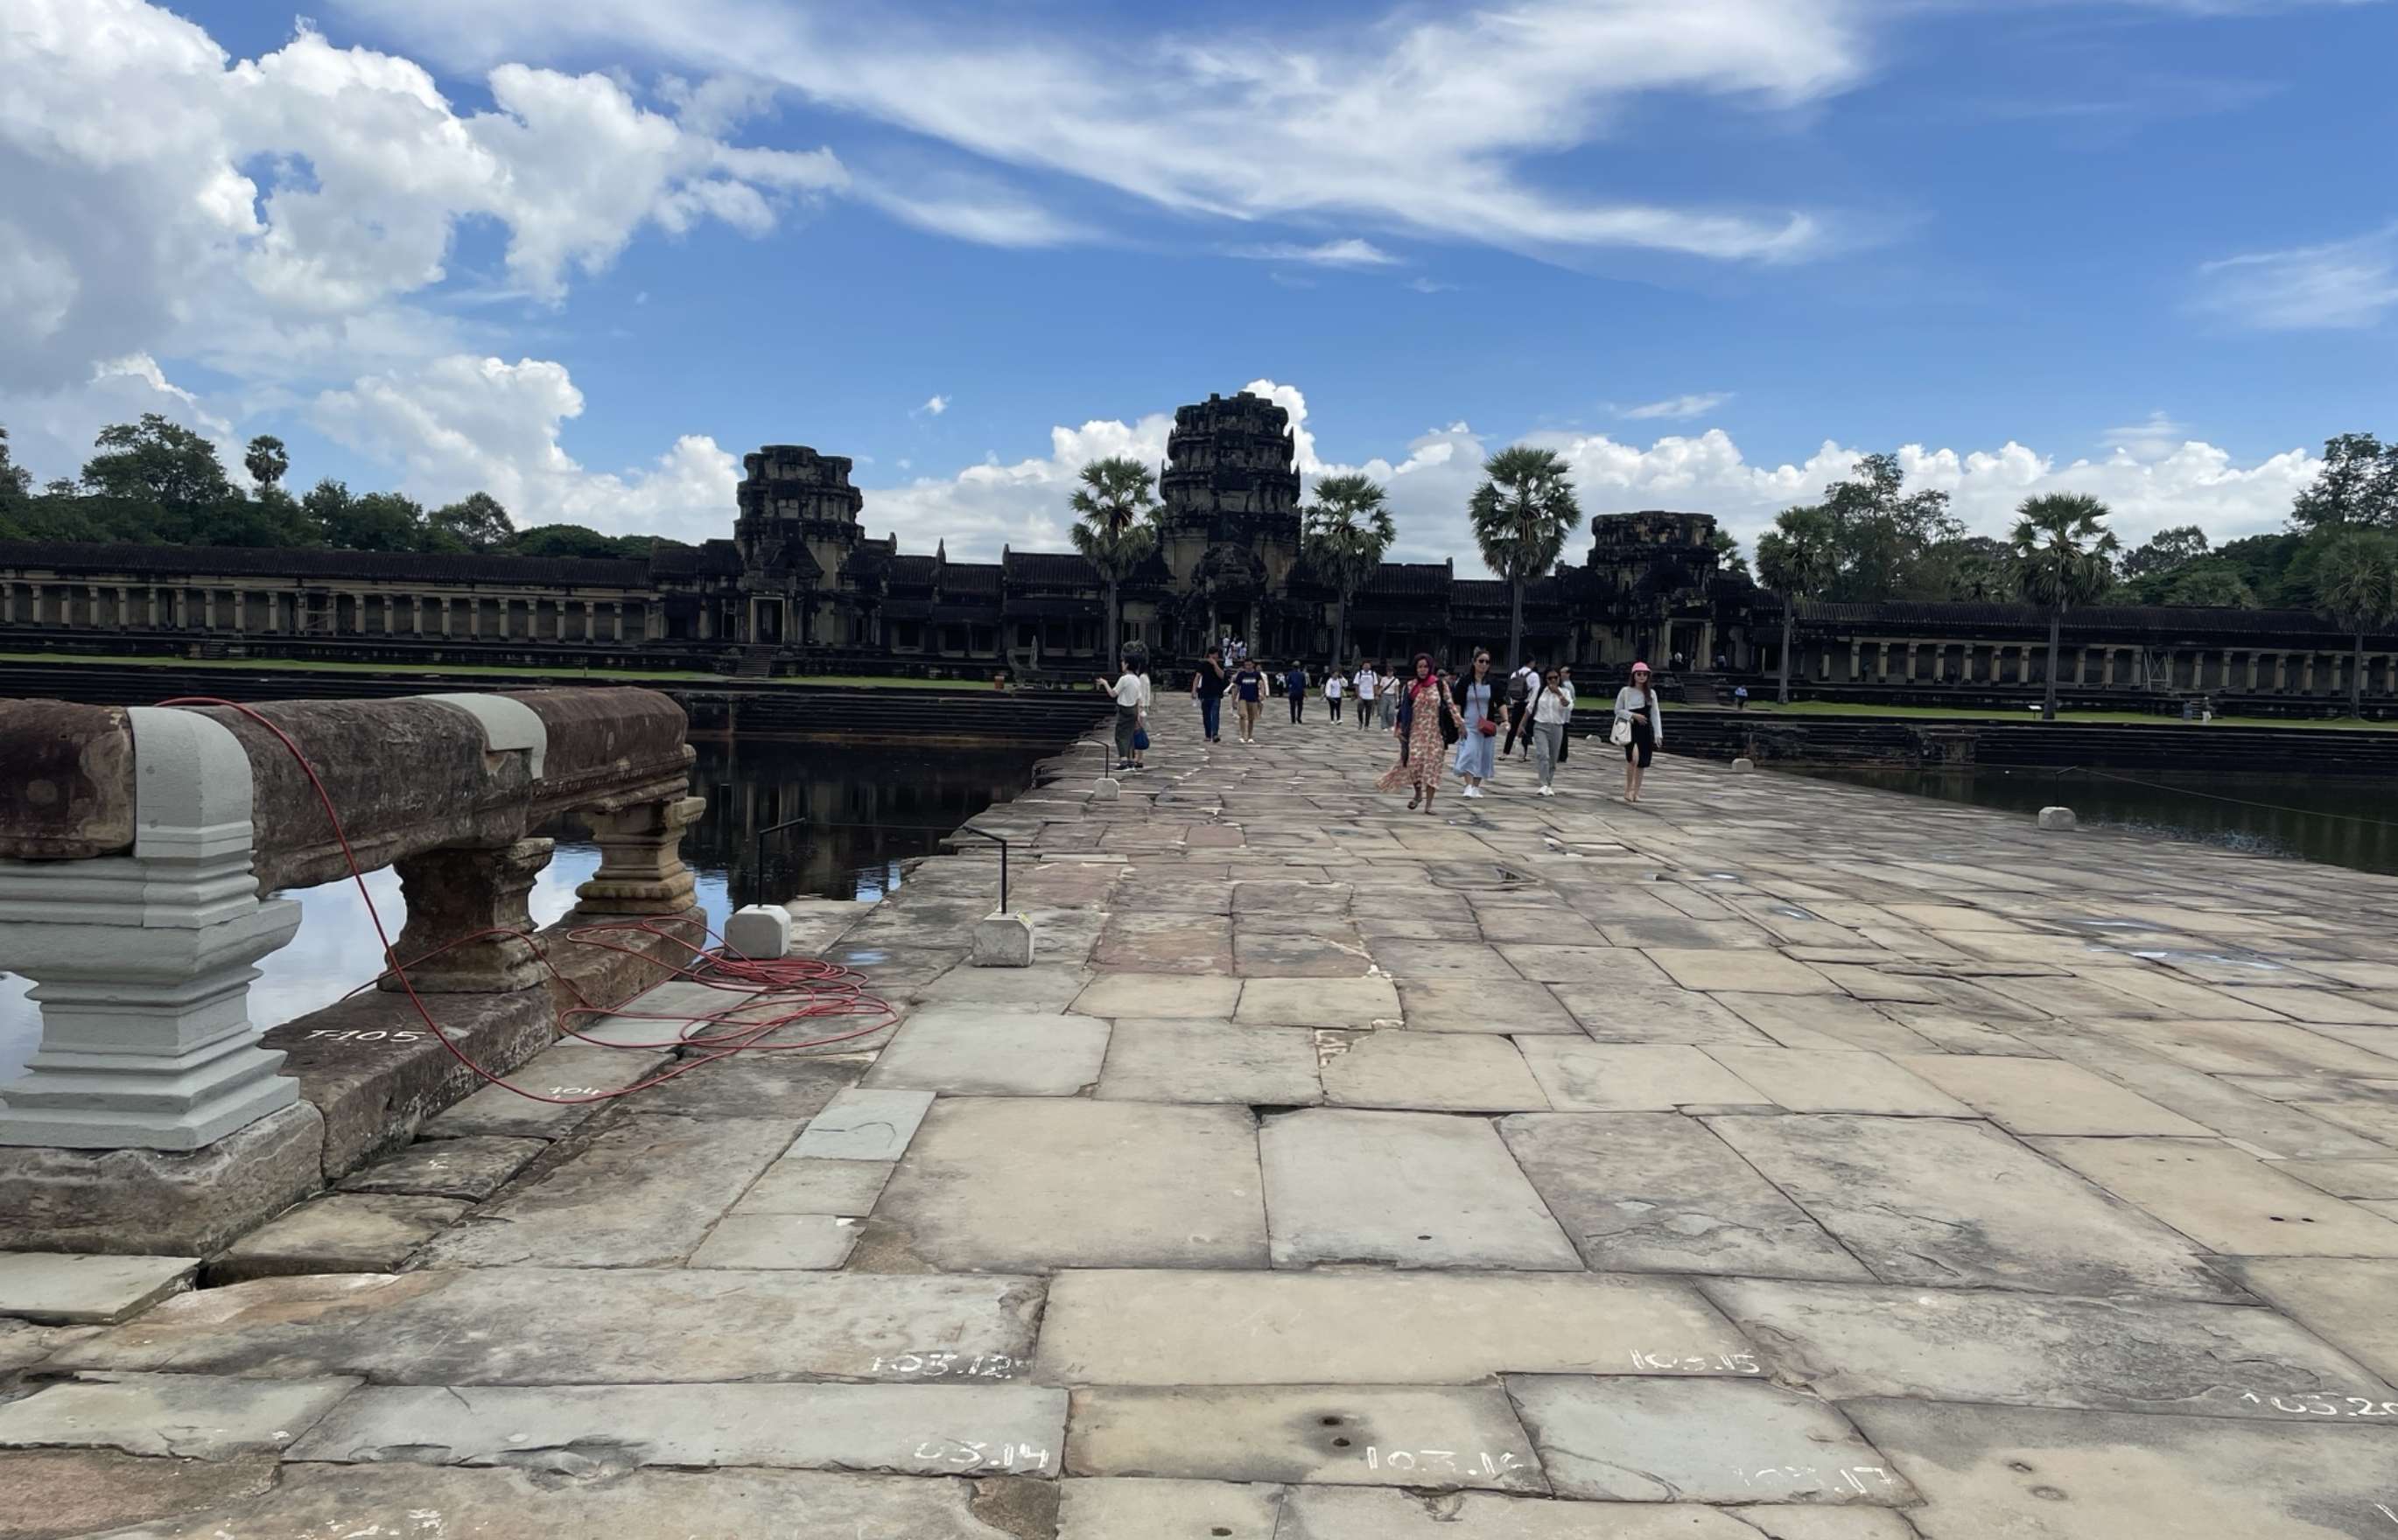 The camera looks down a long causeway across a large moat toward a temple ruin rising from the palms beneath a blue, cloud dappled sky in the distance. Small groups of people are visible far down the causeway, which is paved with giant slabs of stone.